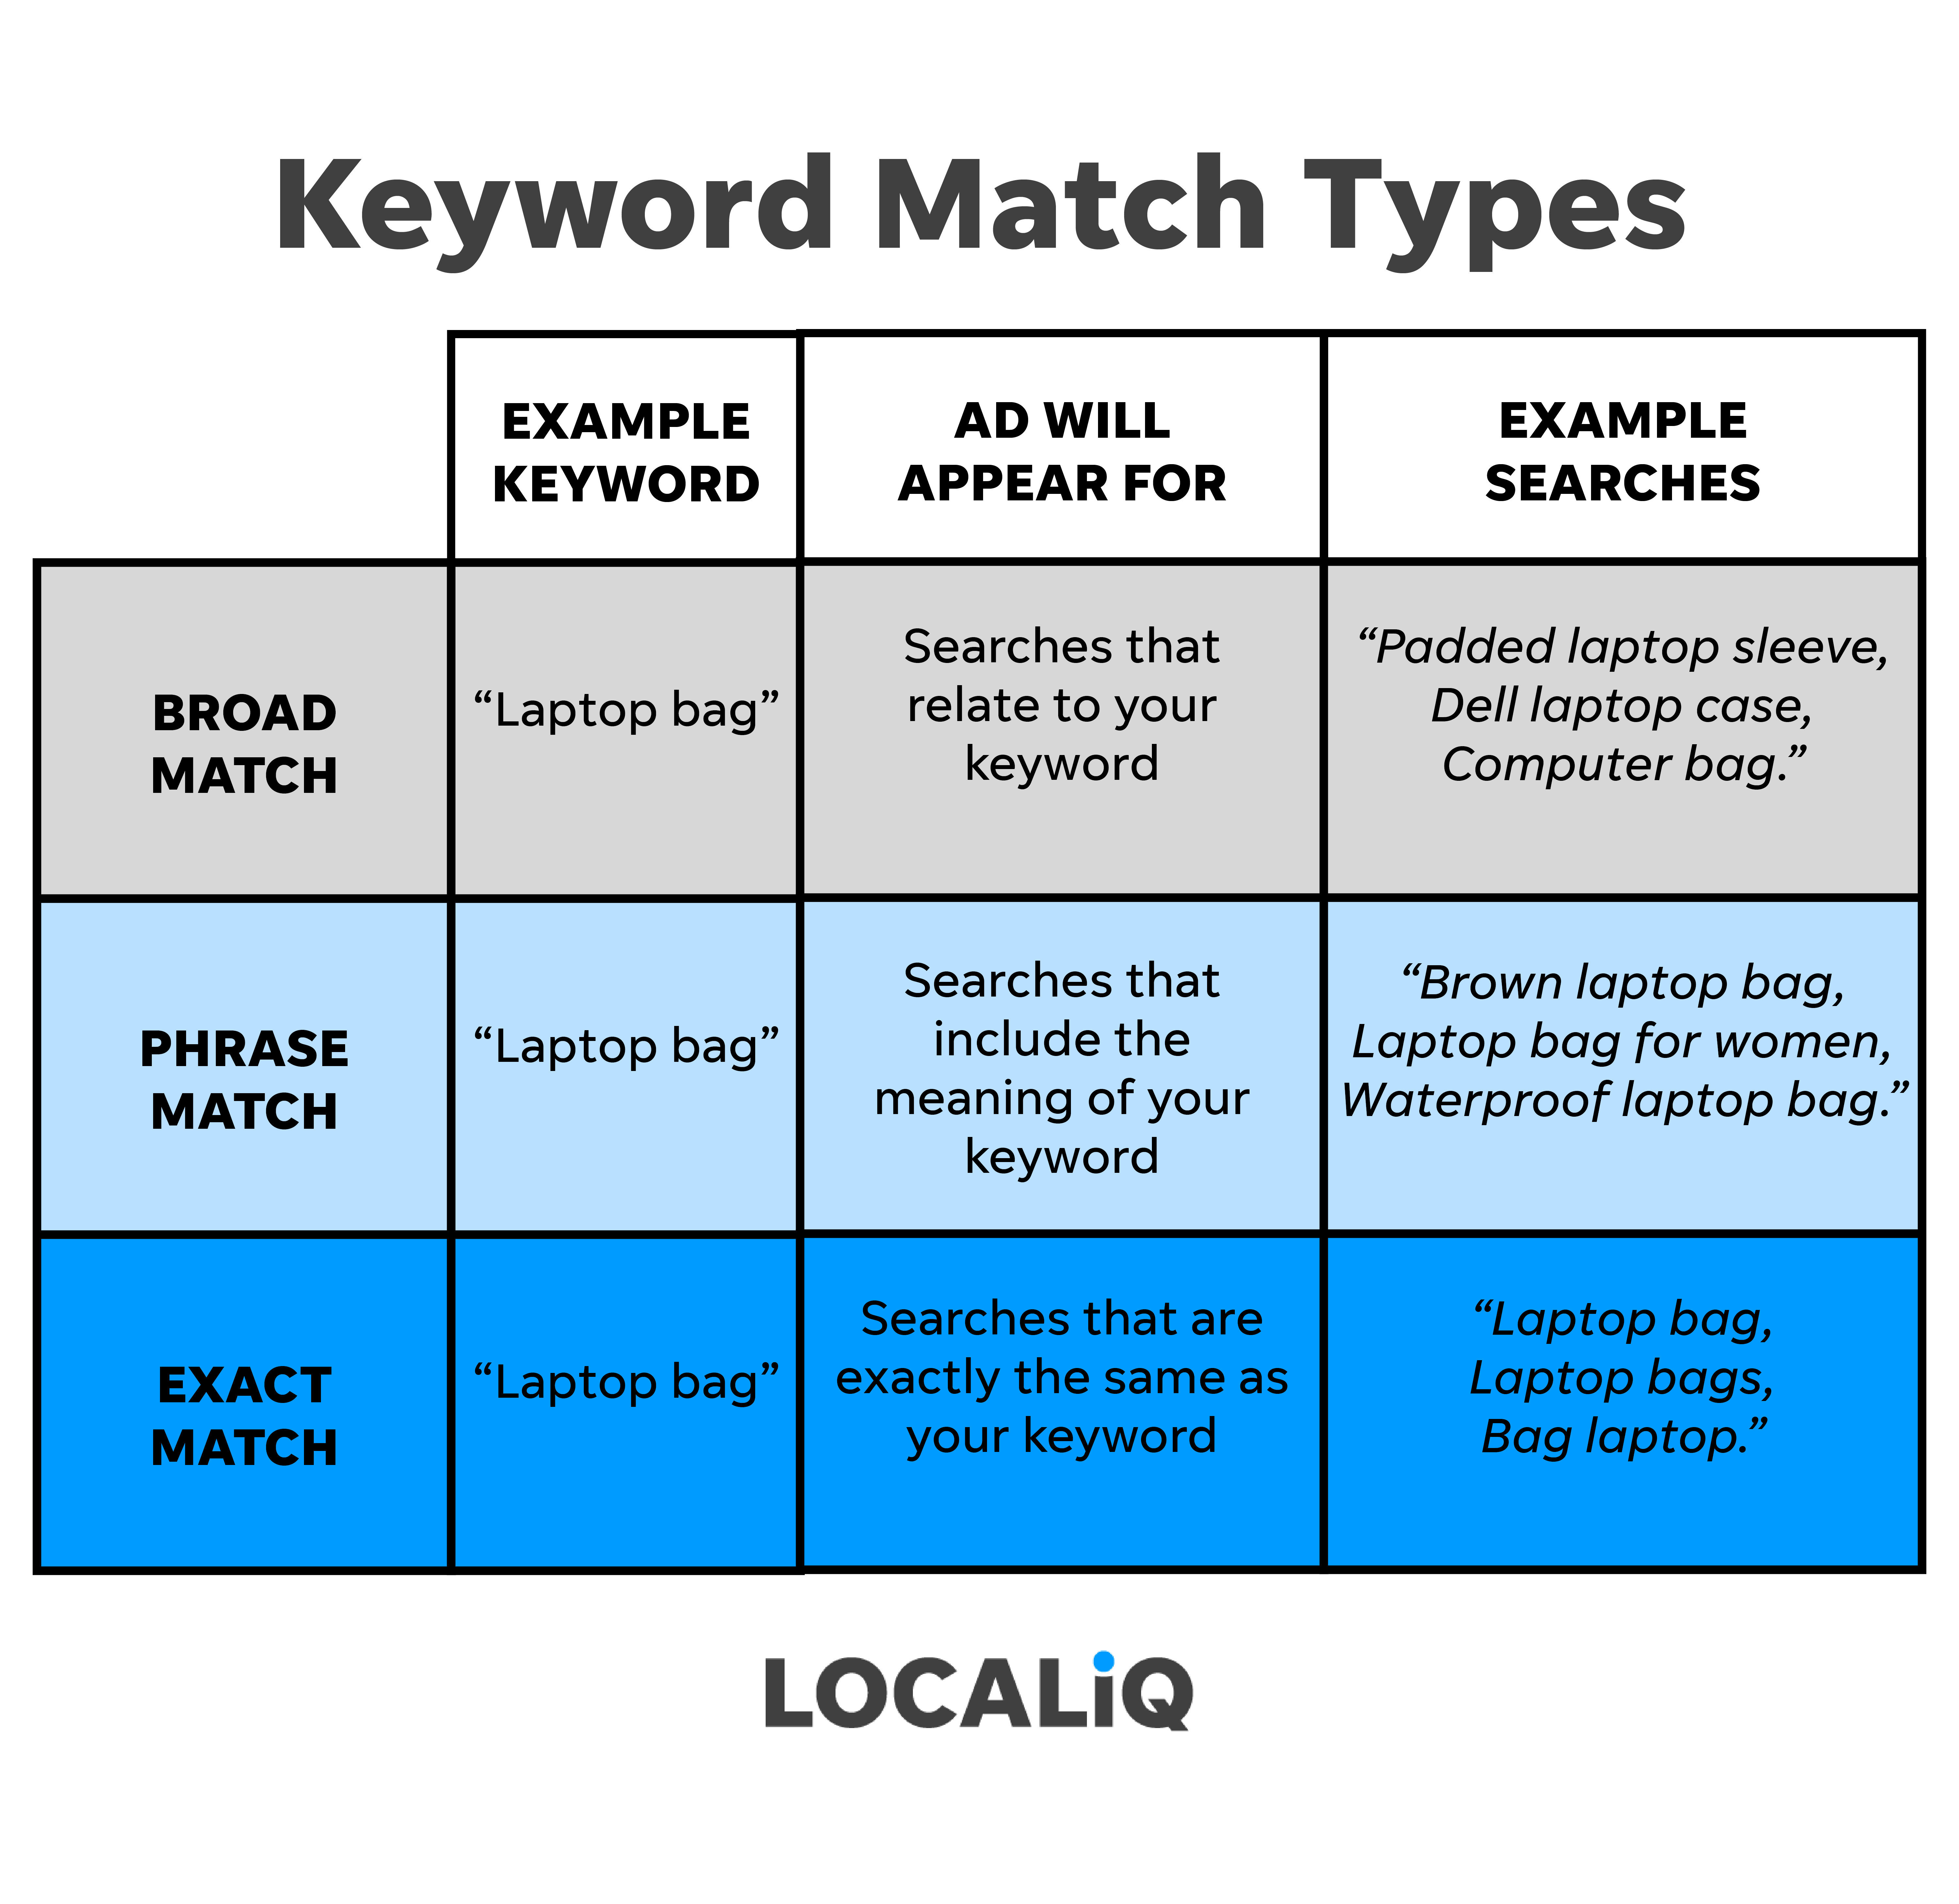 LOCALiQ graphic displaying the different match types with examples